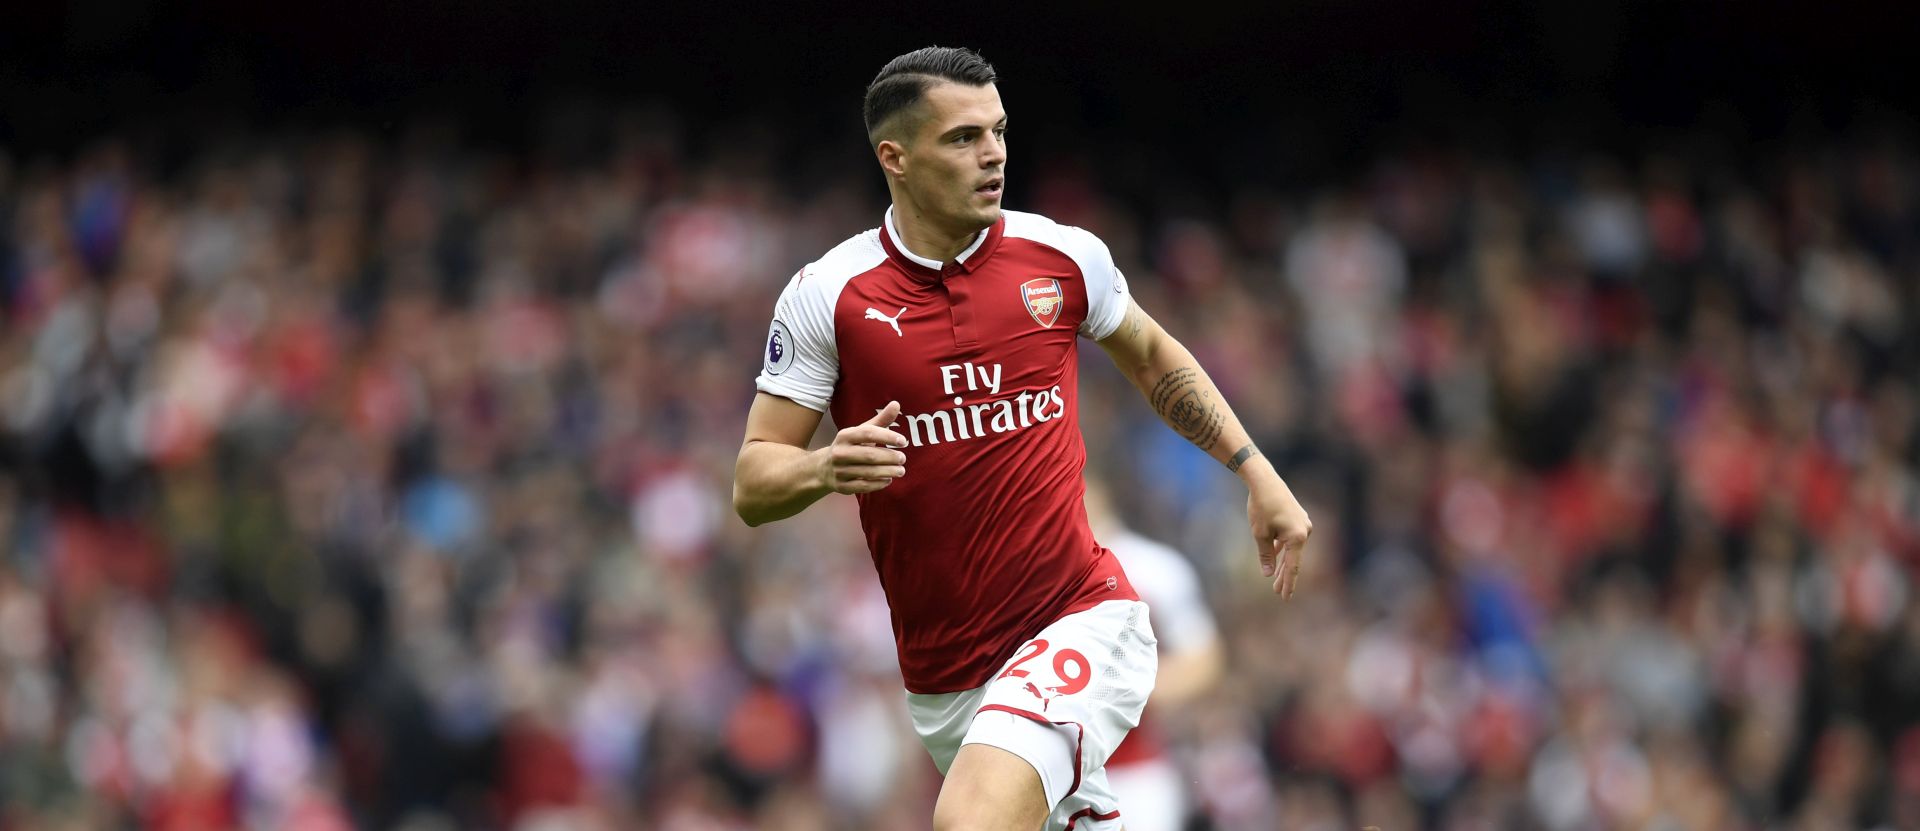 epa06237820 Arsenal's Granit Xhaka during the English Premier League soccer match between Arsenal vs Brighton & Hove Albion at Emirates, London, Britain, 1st October 2017.  EPA/WILL OLIVER EDITORIAL USE ONLY. No use with unauthorized audio, video, data, fixture lists, club/league logos or 'live' services. Online in-match use limited to 75 images, no video emulation. No use in betting, games or single club/league/player publications